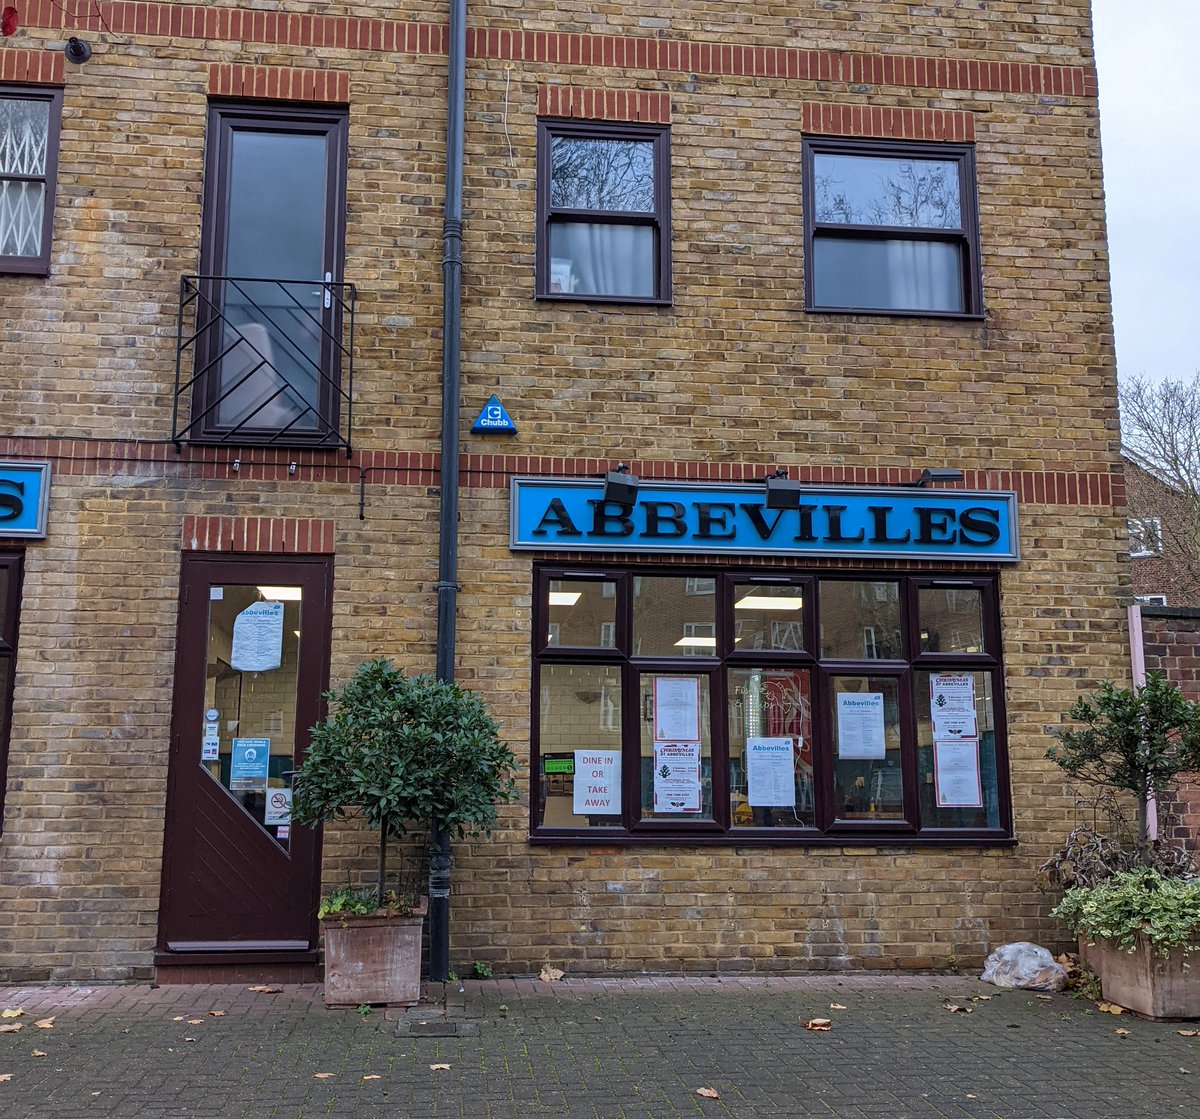 Abbevilles restaurant at Clapham common provides freshly prepared food and also works within the local community providing work placements and training for people with mental health issues and other disadvantages in Lambeth. #Clapham